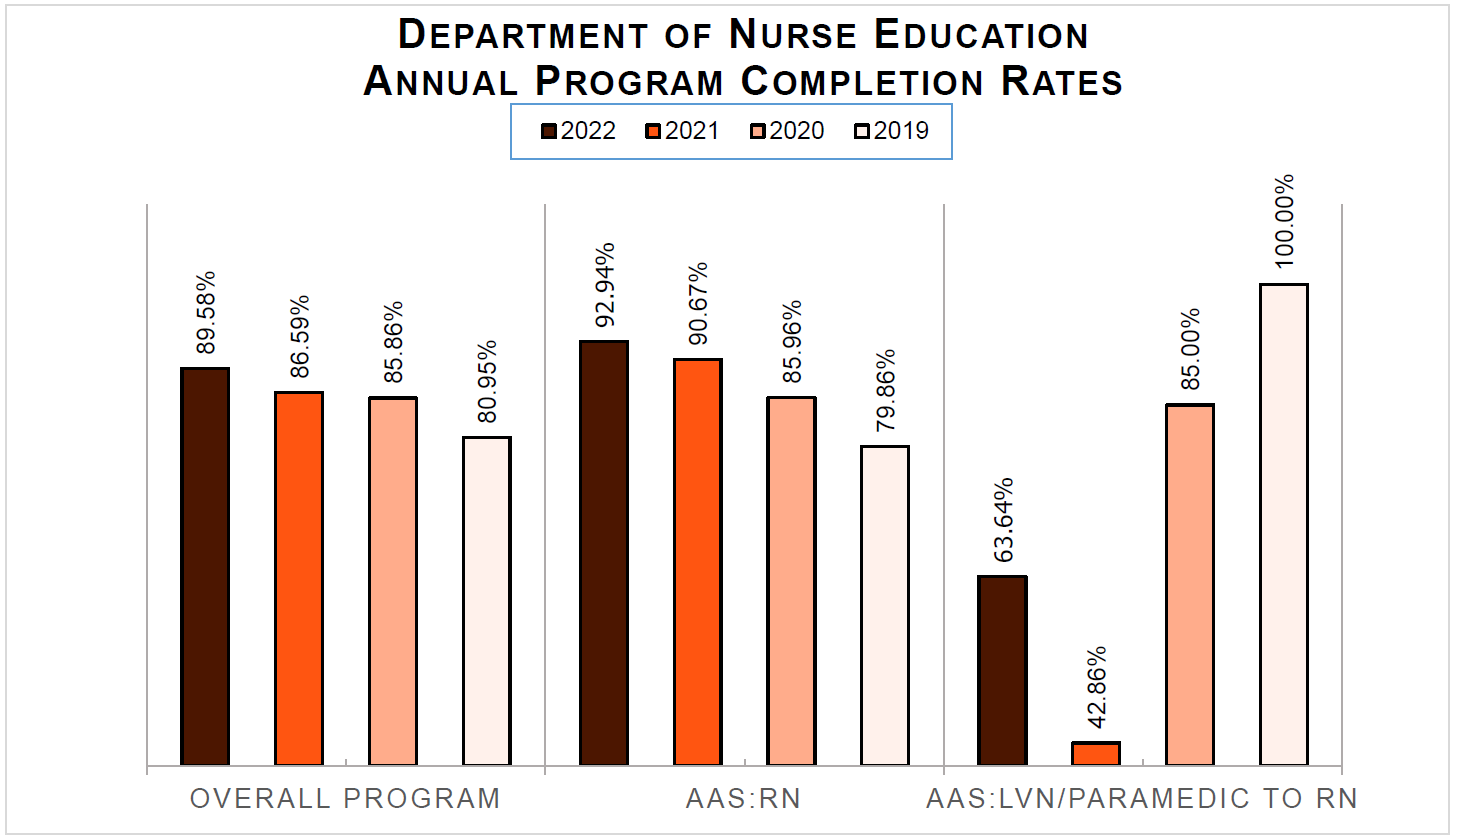 Department of Nurse Education annual program completion rates 2019-2022